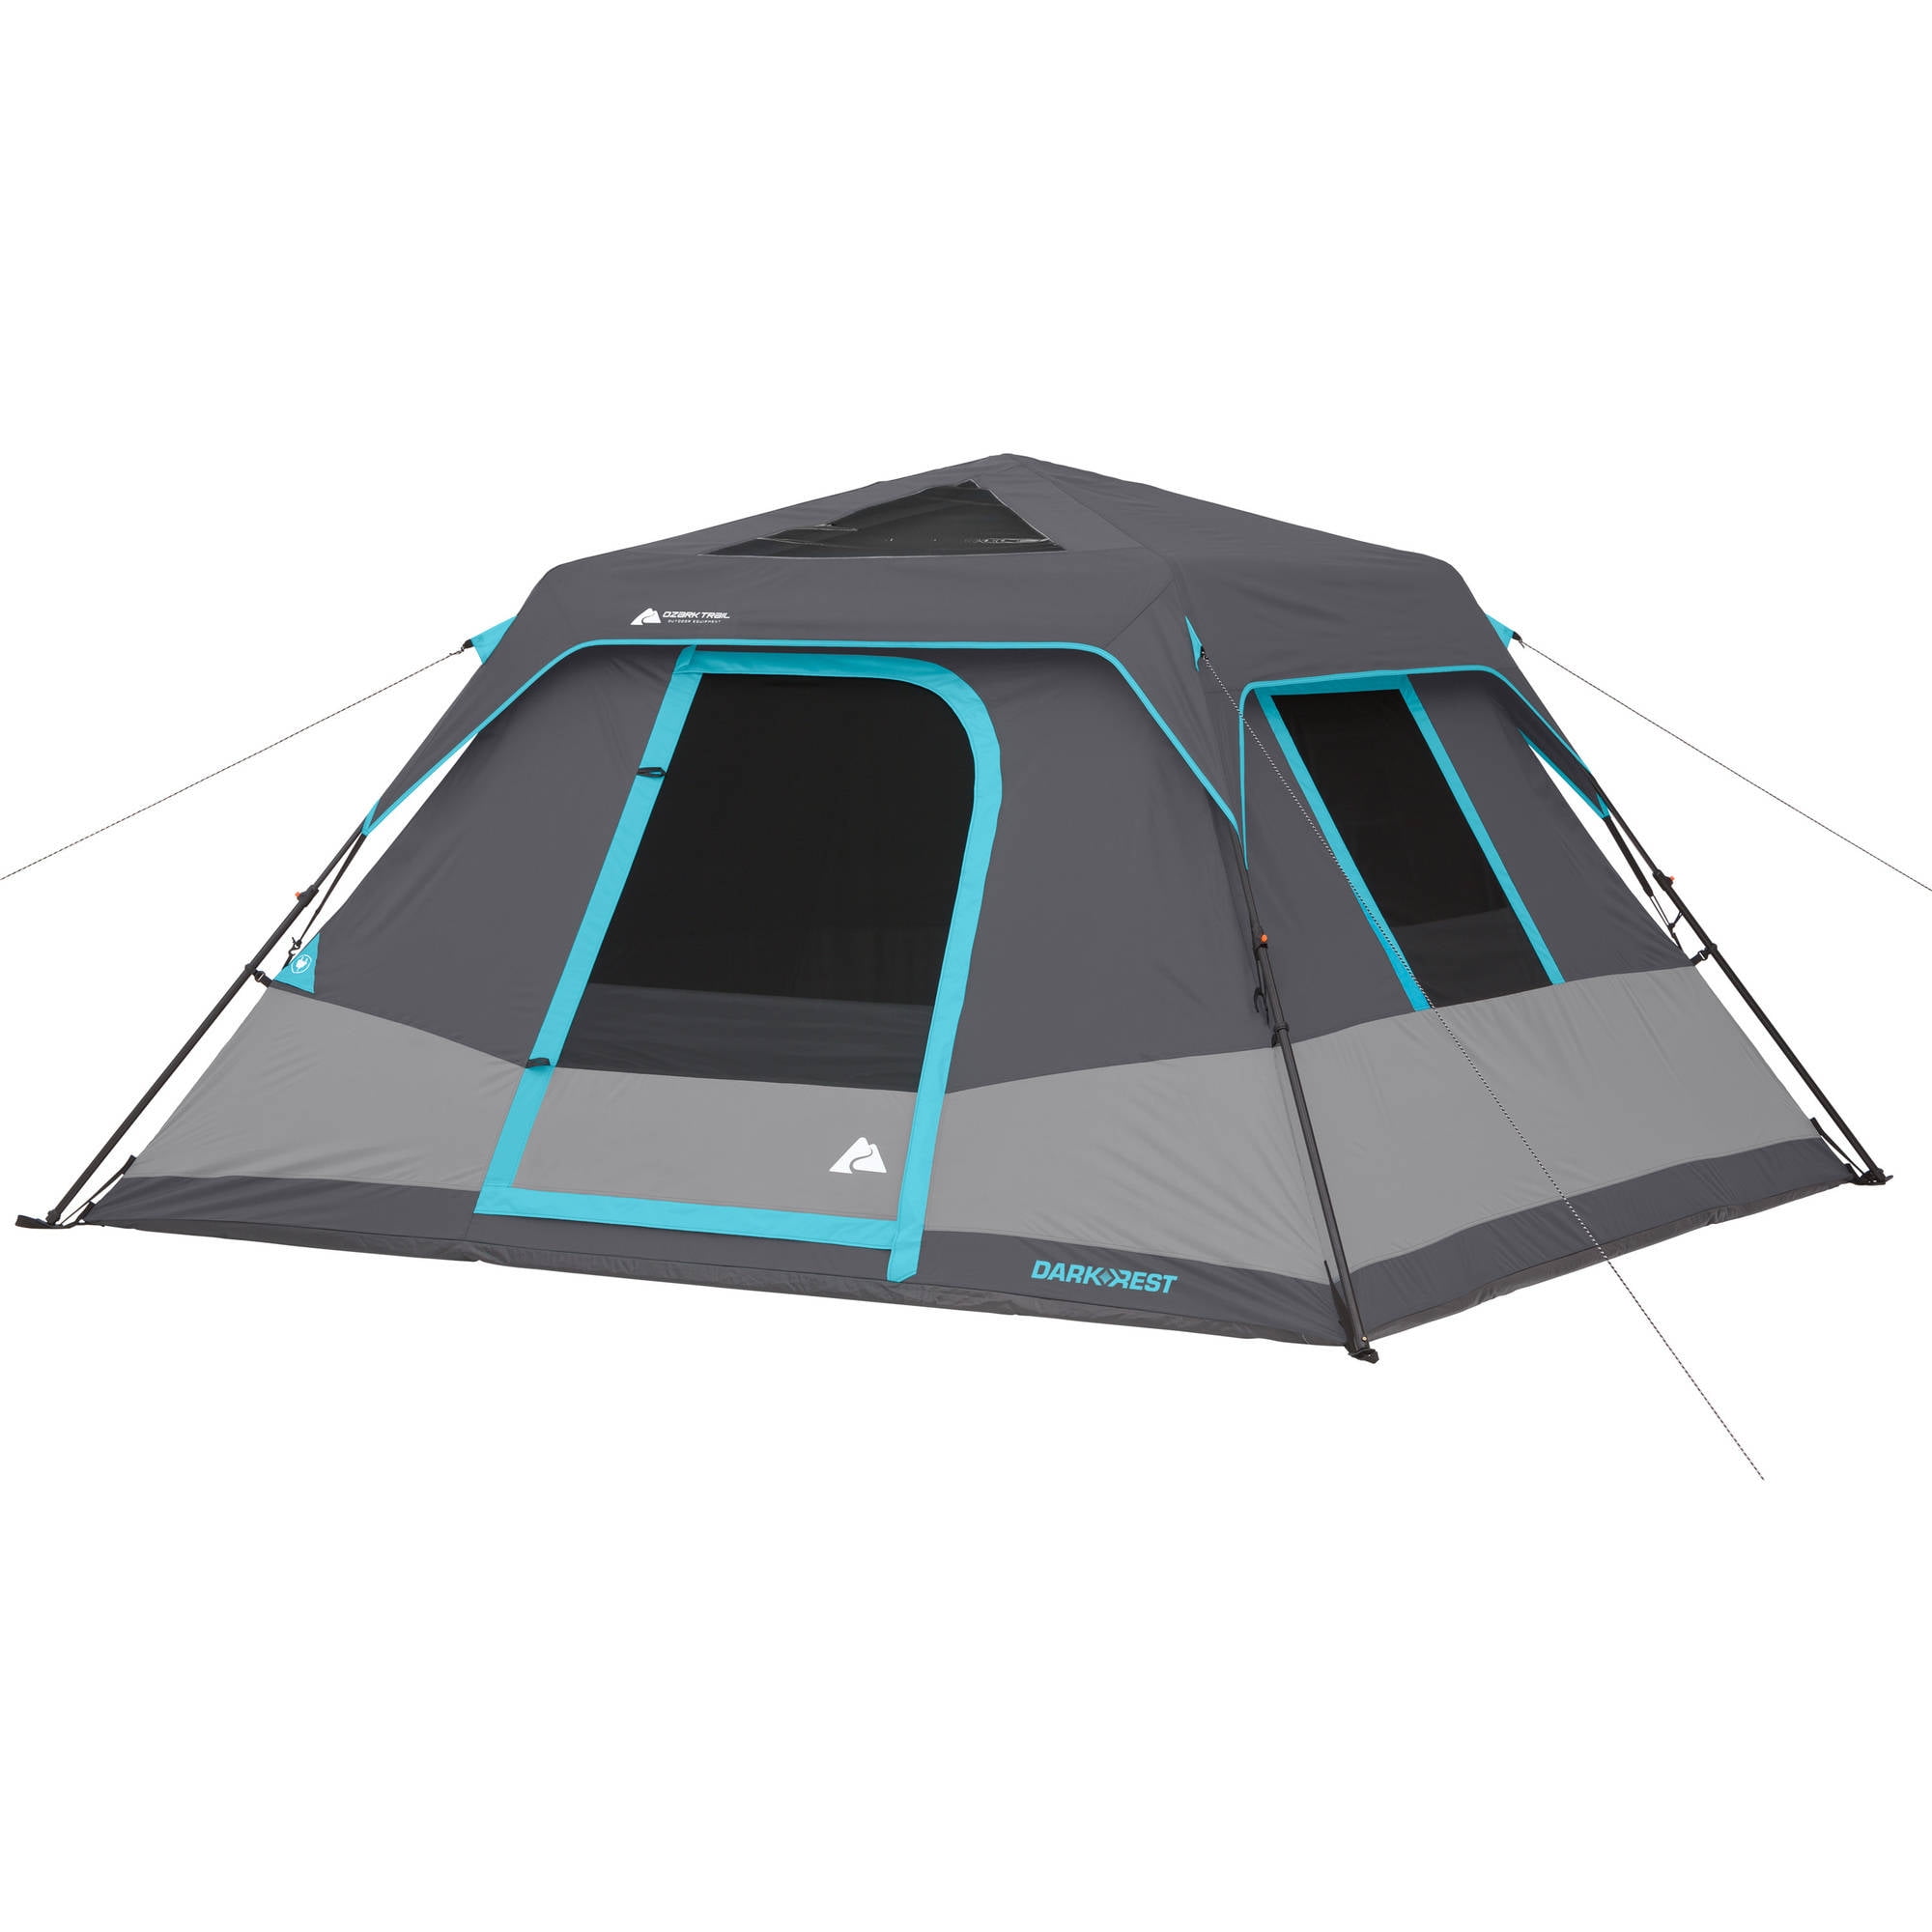 ozark trail 5 person tent instructions